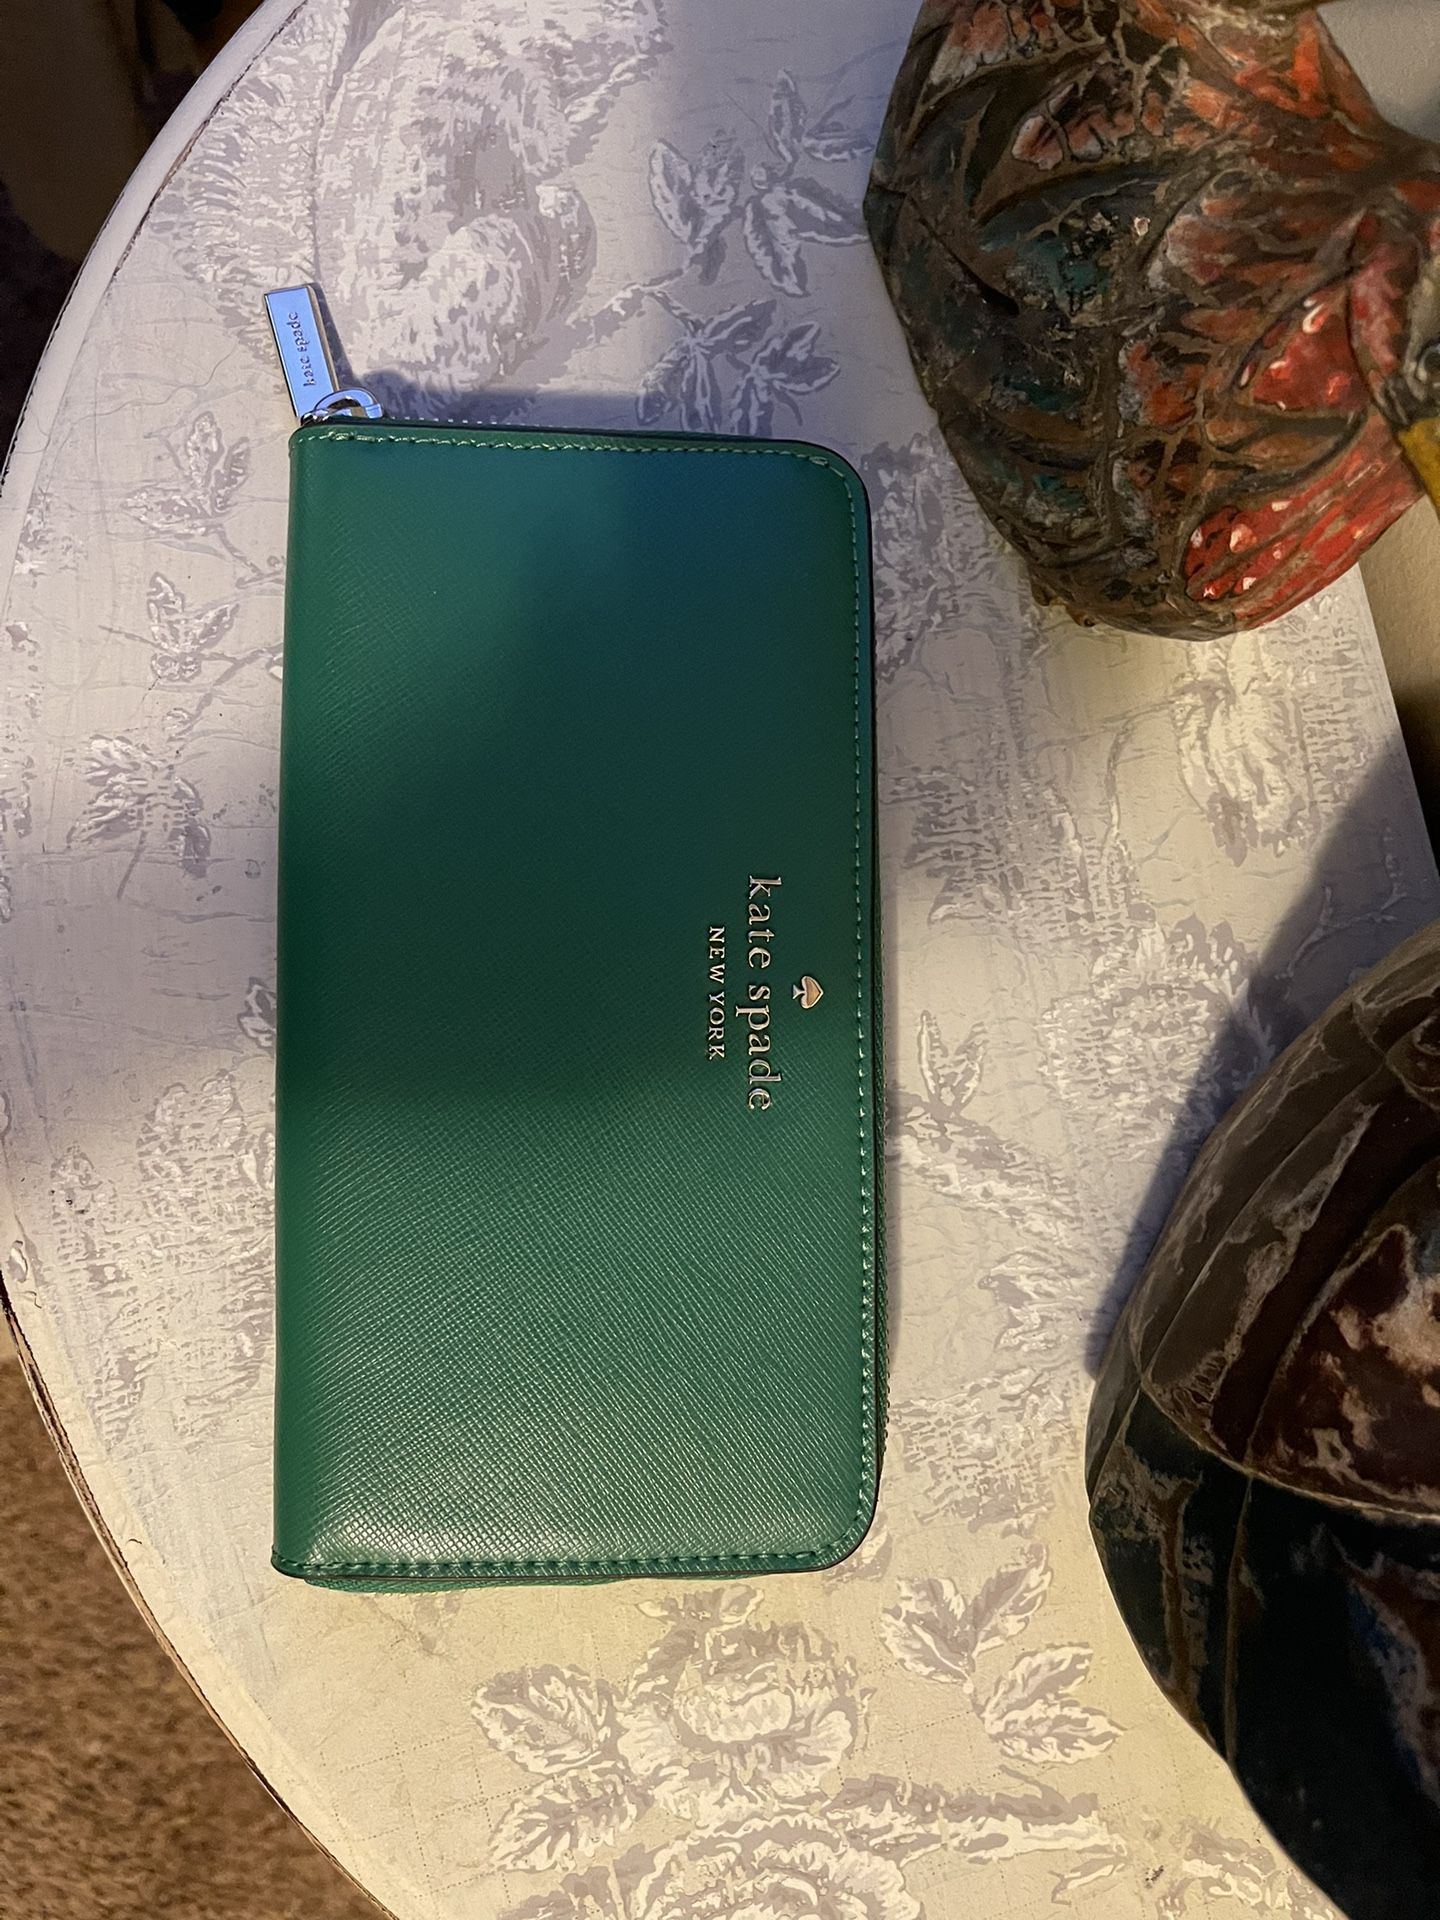 New with tags, mint green kate spade leather wallet in perfect condition., !! Original price at 198$!!, !! Selling at 100$!!